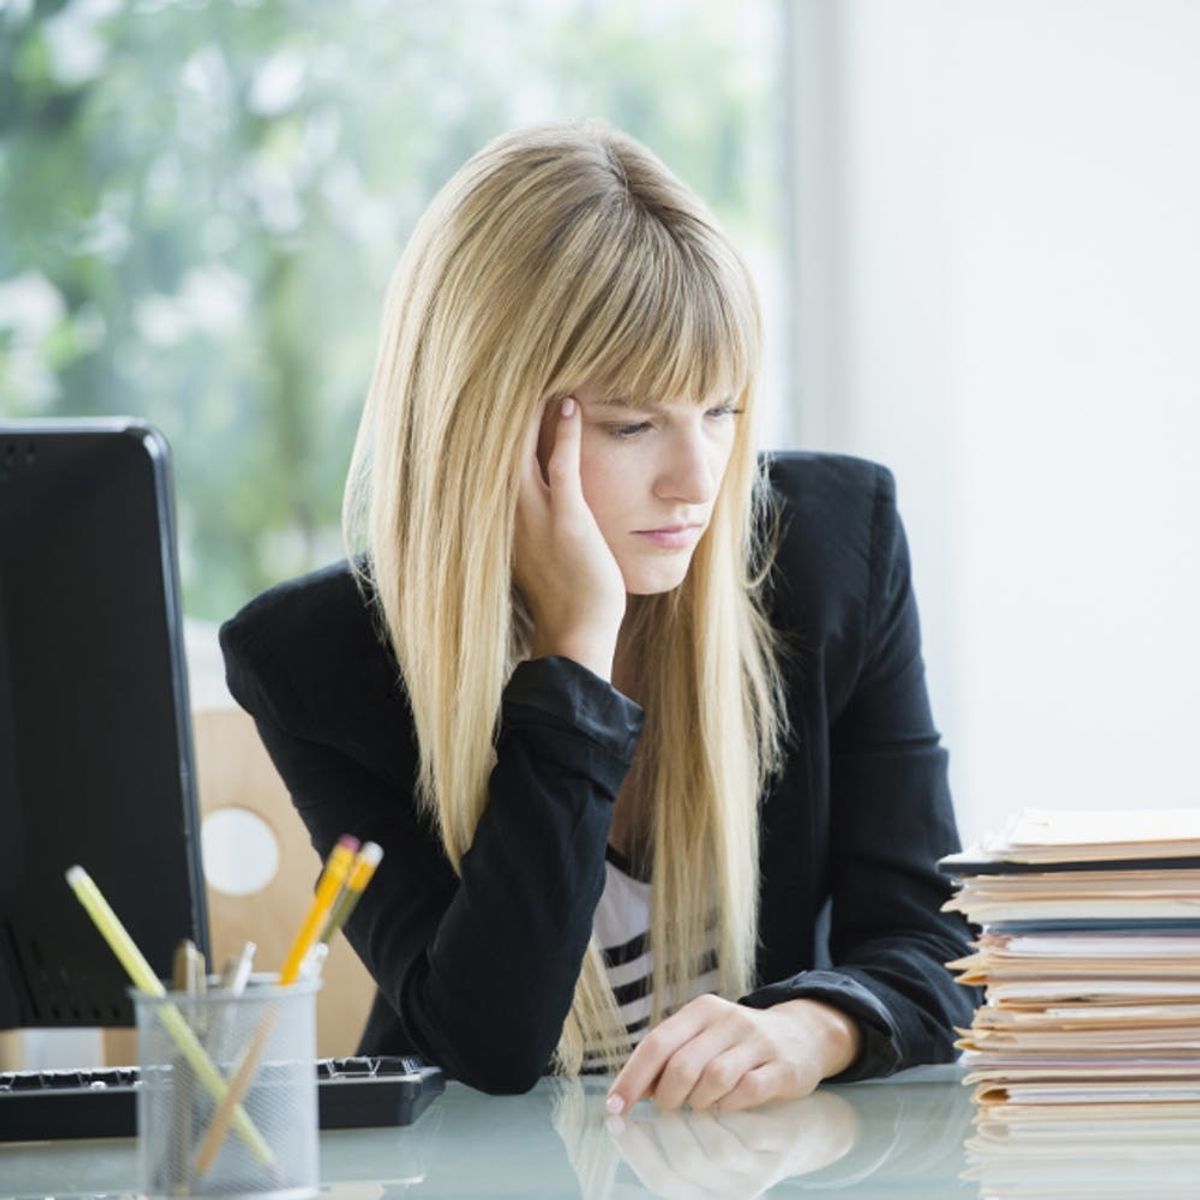 7 Things You’re Doing at Work That Are Hurting Your Health